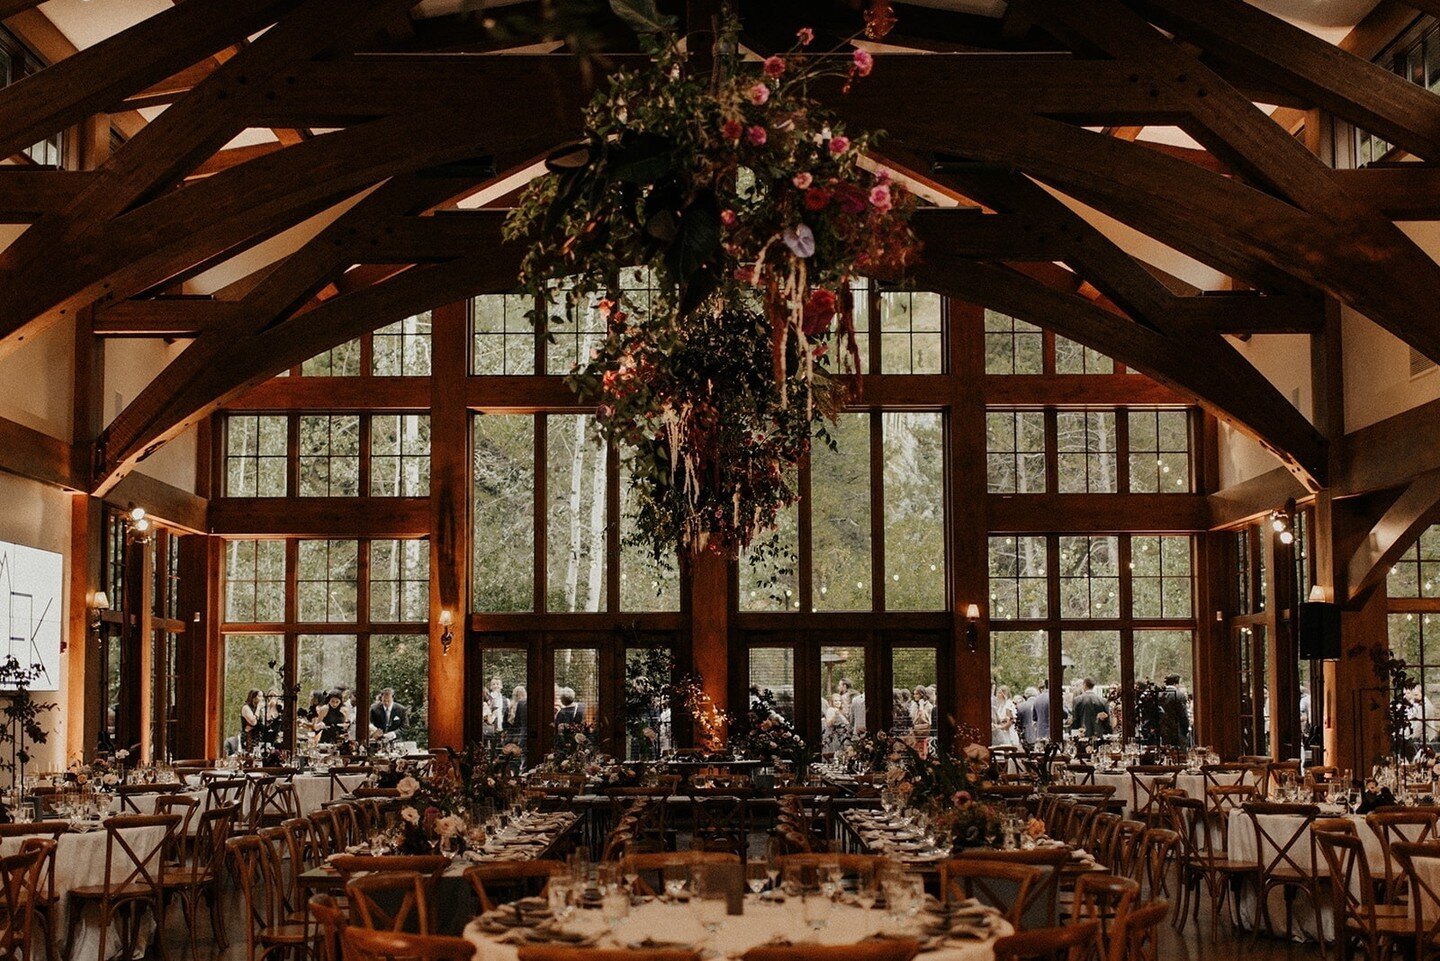 The great outdoors. The great indoors. A wide view of the details for 200 on a leafy (not snowy) day in Vail.⁠
&mdash;&mdash;&mdash;&mdash;&mdash;&mdash;&mdash;&mdash;⁠
everyone will be there by @kenzandnick⁠
&mdash;&mdash;&mdash;&mdash;&mdash;&mdash